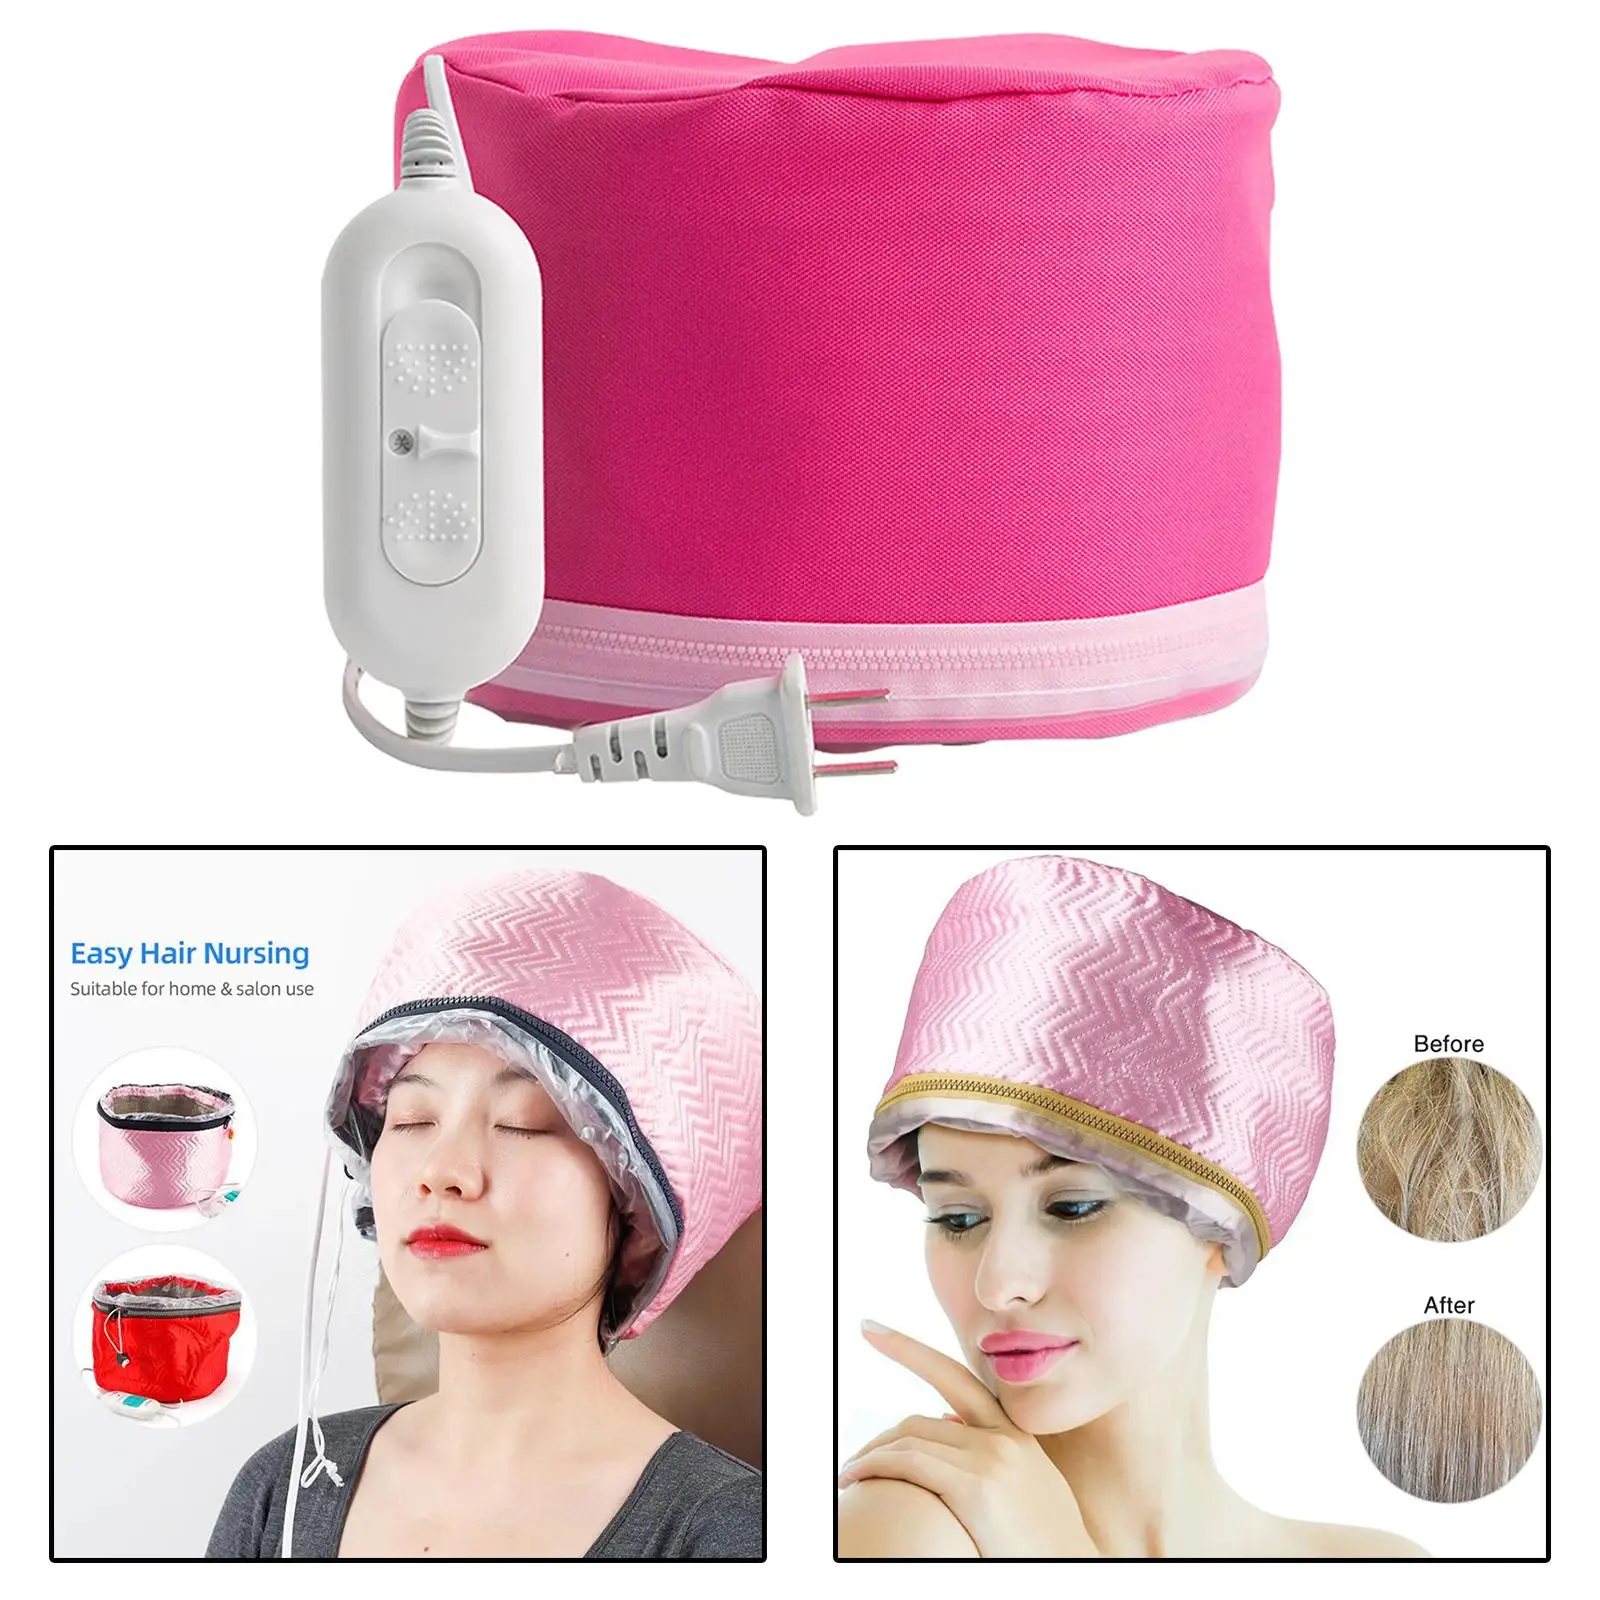 Hair Heating Caps Steamer 3-Mode Adjustable Thermal Caps Dryers for Deep Conditioning Home Salon Curly Hair Hair Scalp Women Men